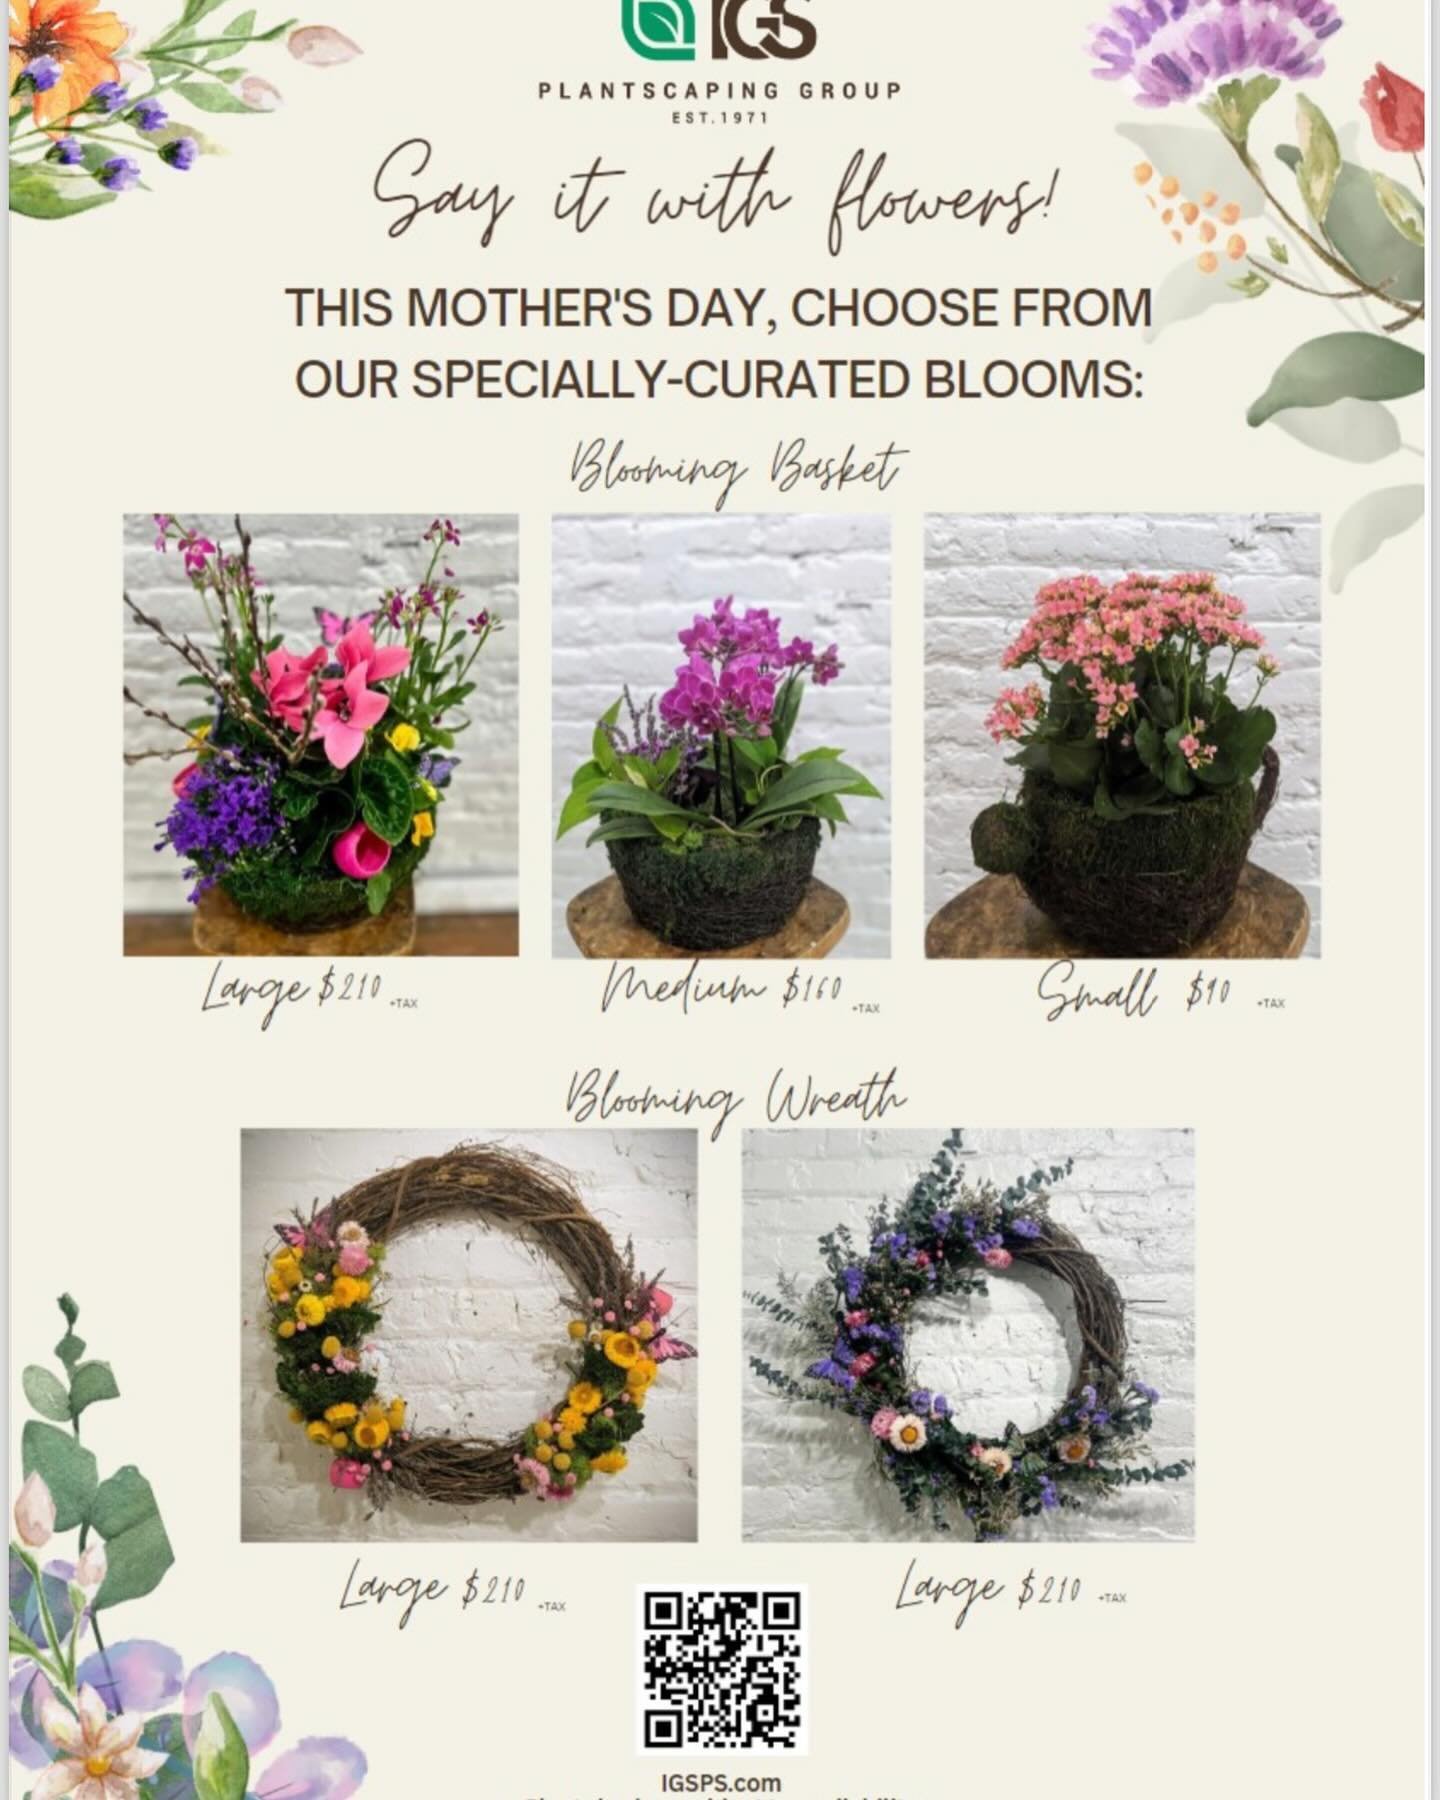 Mother's Day Shop is open! Order on our website, drop us a line, or stop by a workshop @fleursdevilles @900shops this weekend.

#mothersday #mothersdaygifts #chicagomothersday